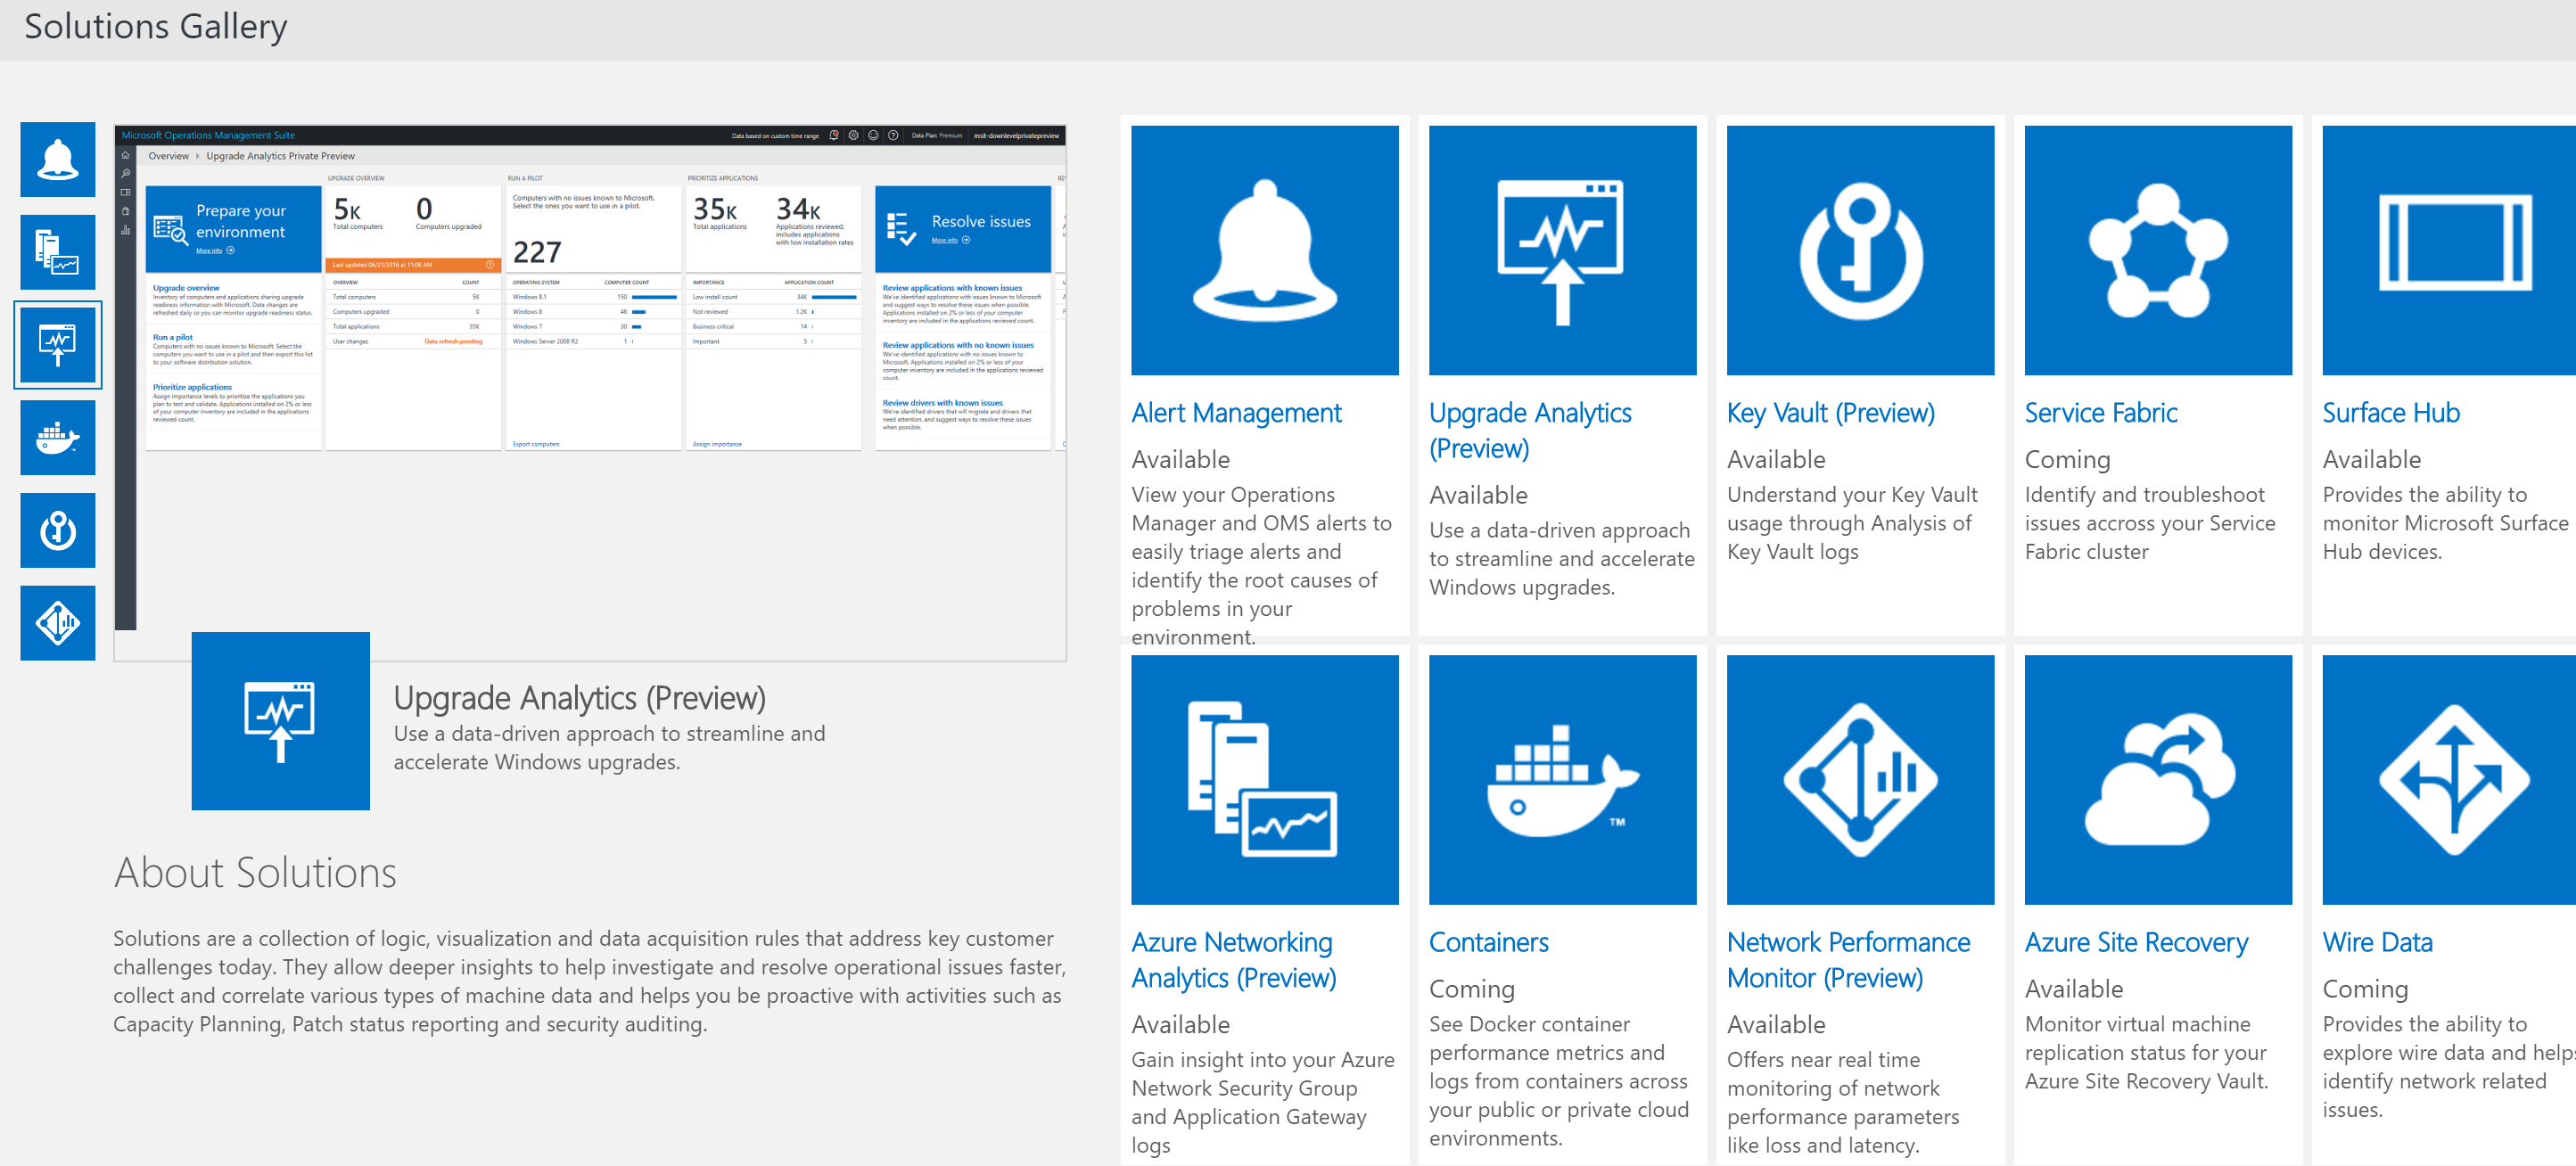 The Azure Log Analytics (OMS) solutions gallery [Image Credit: Aidan Finn]